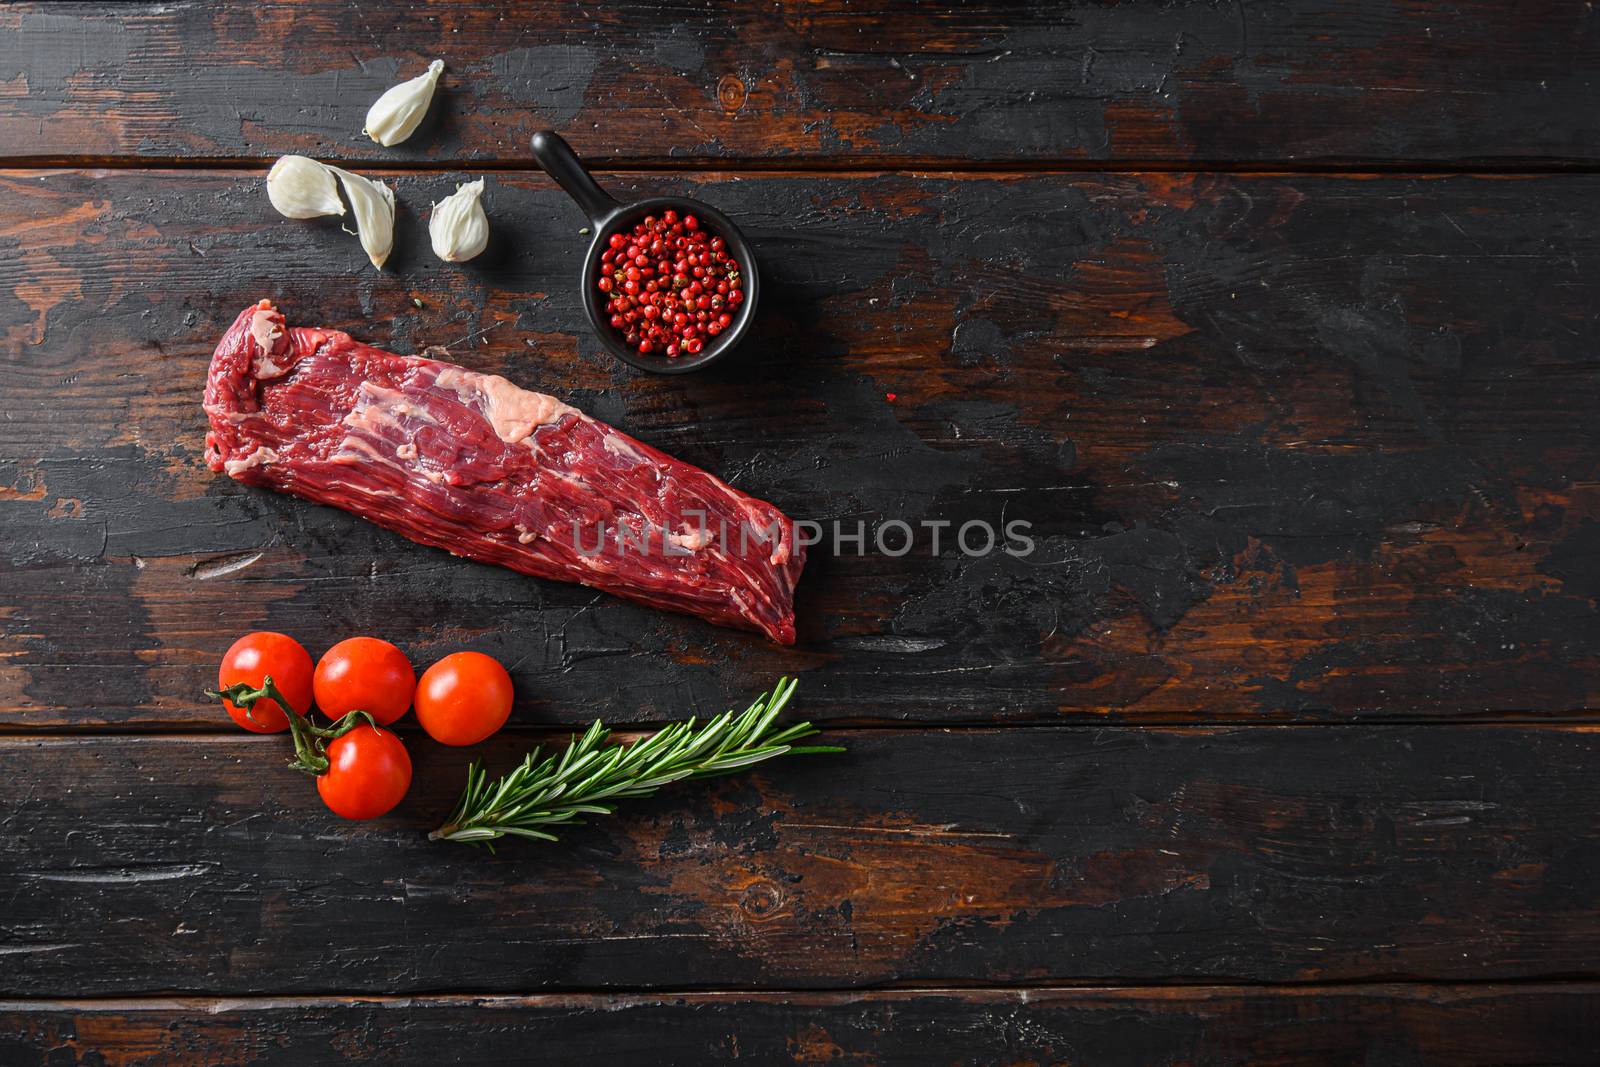 Organic machete steak or hanging tende cut, with rosemary over wood background Top view space for text.